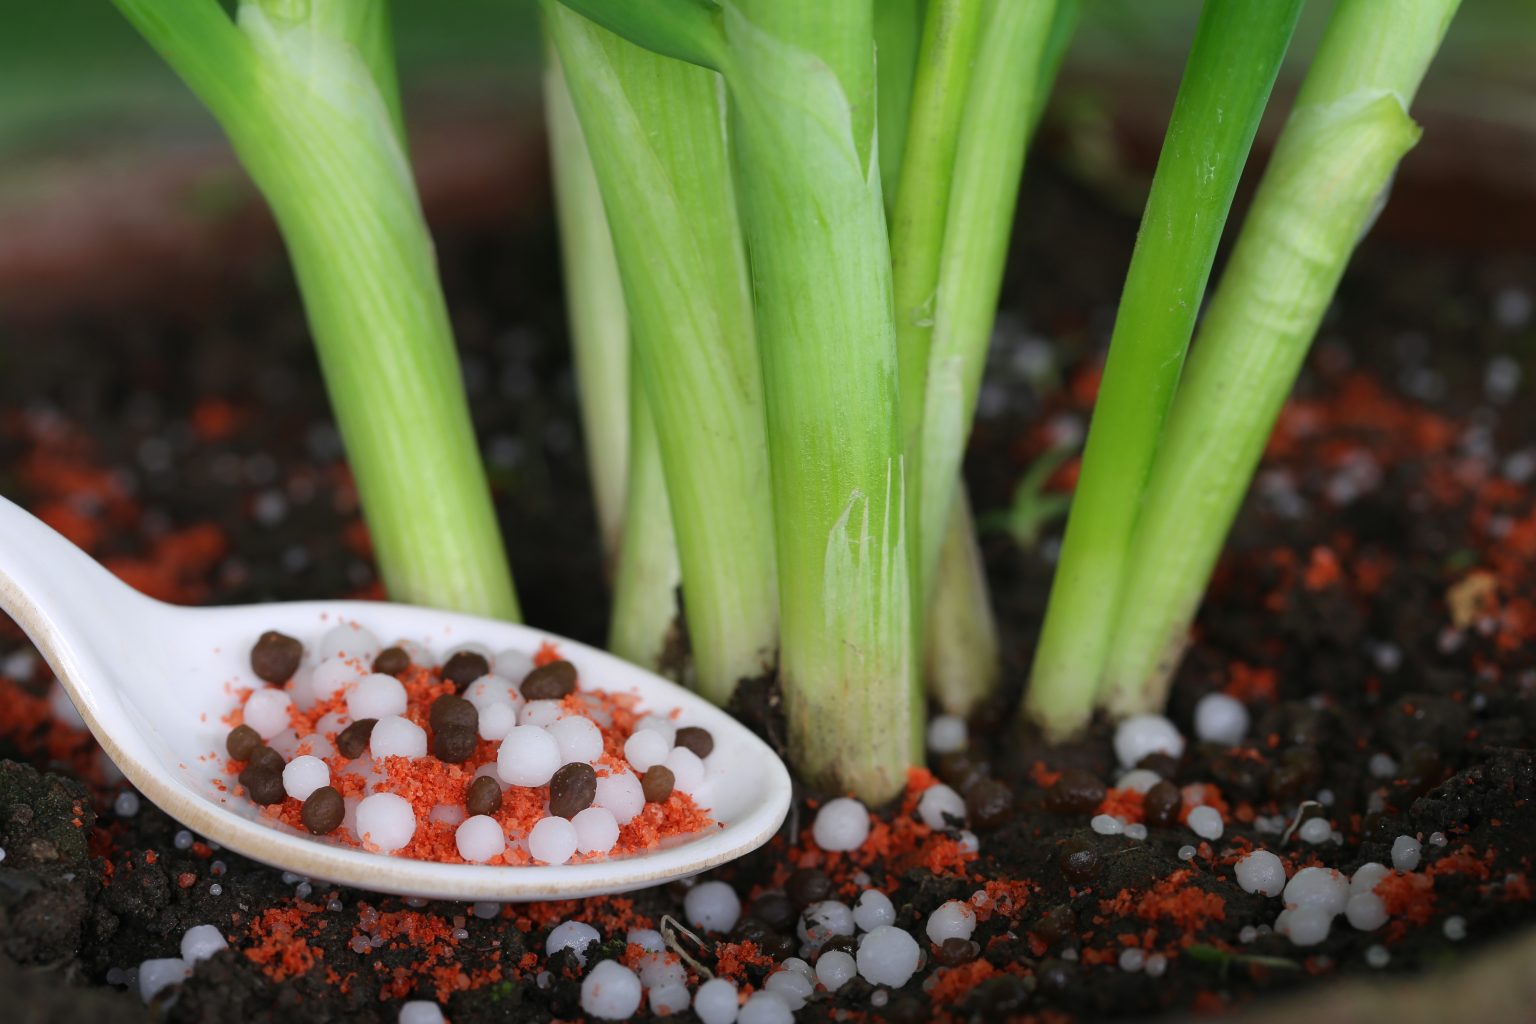 Onion plant with chemical fertilizer made of potassium hydroxide